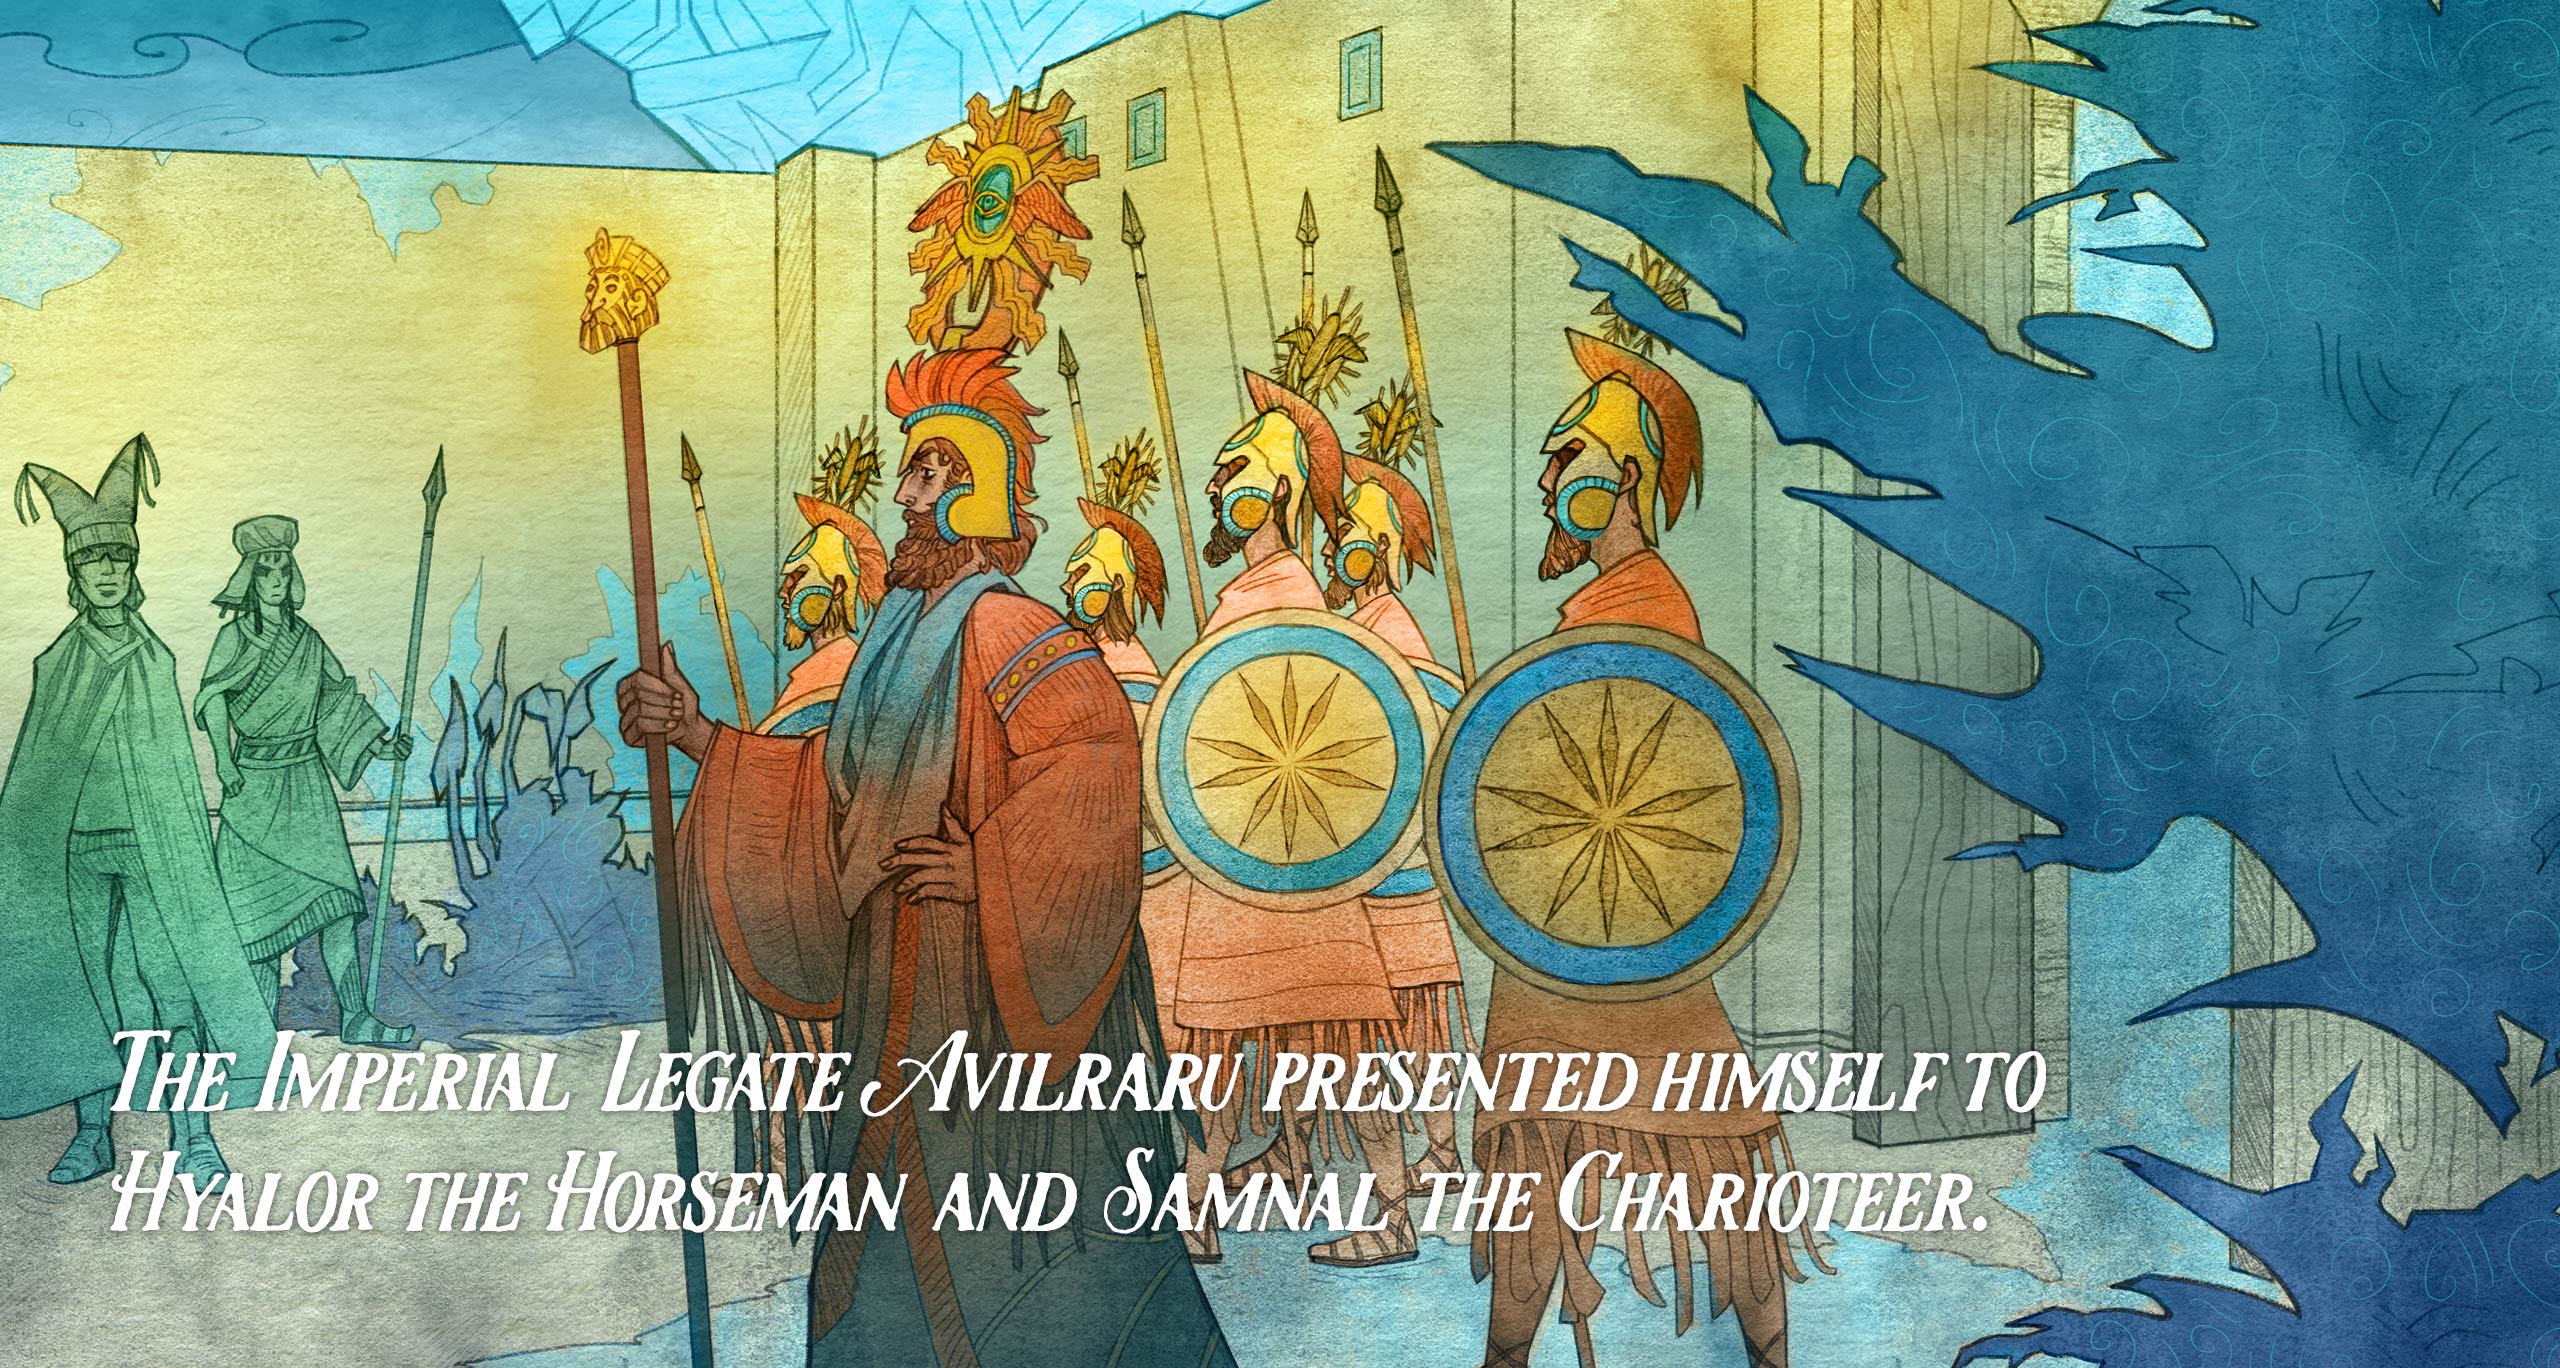 The Imperial Legate Avilraru presented himself to Hyalor the Horseman and Samnal the Charioteer.